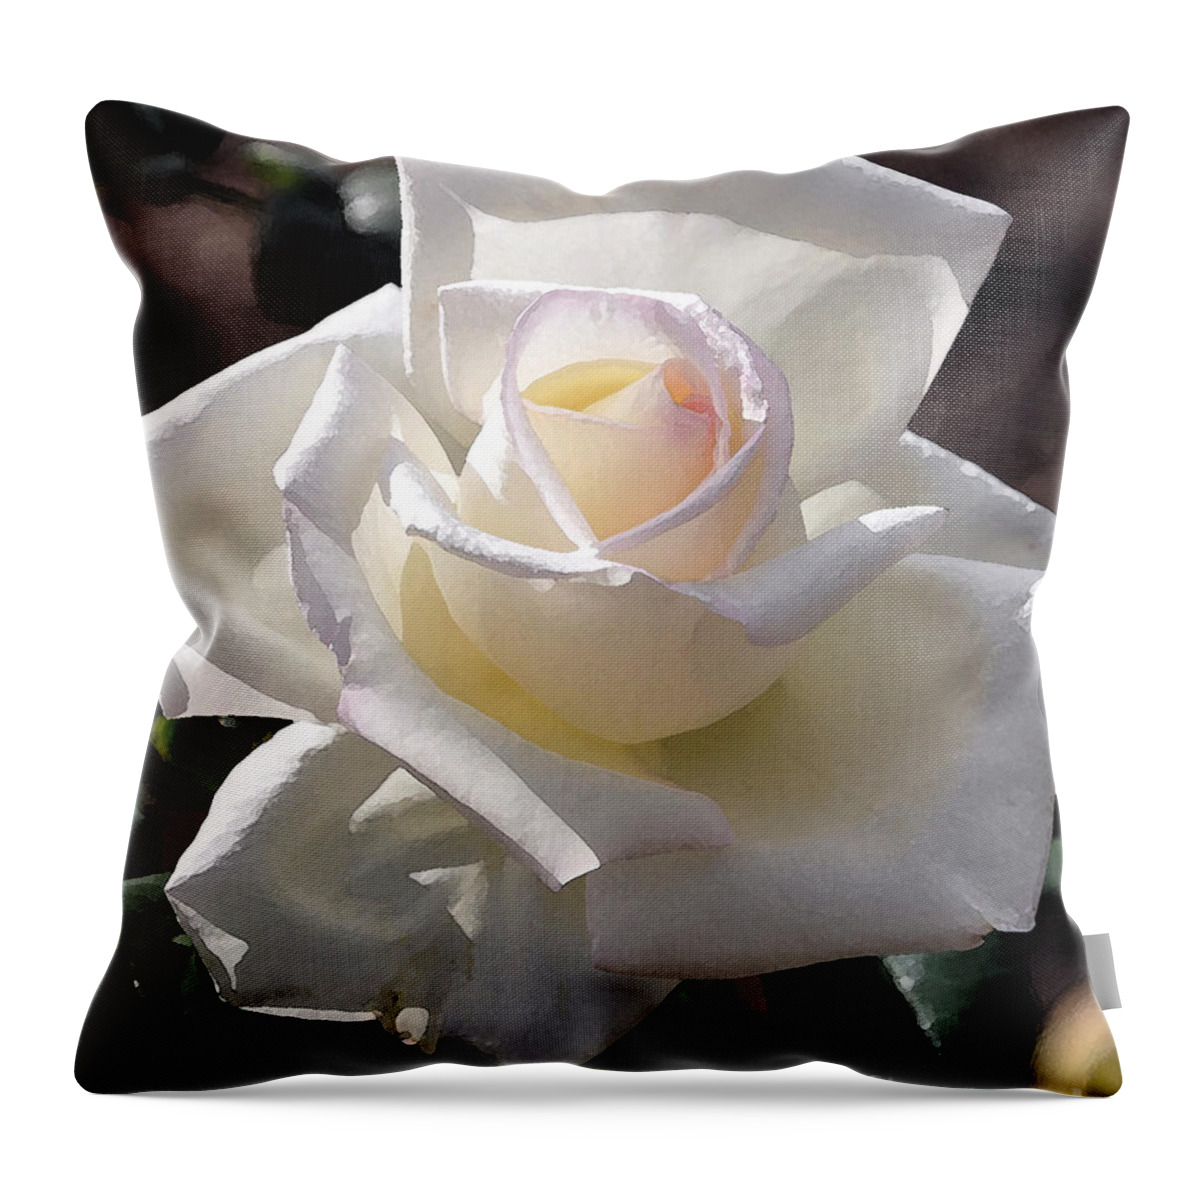 Rose Throw Pillow featuring the digital art Snow White Rose by Kirt Tisdale